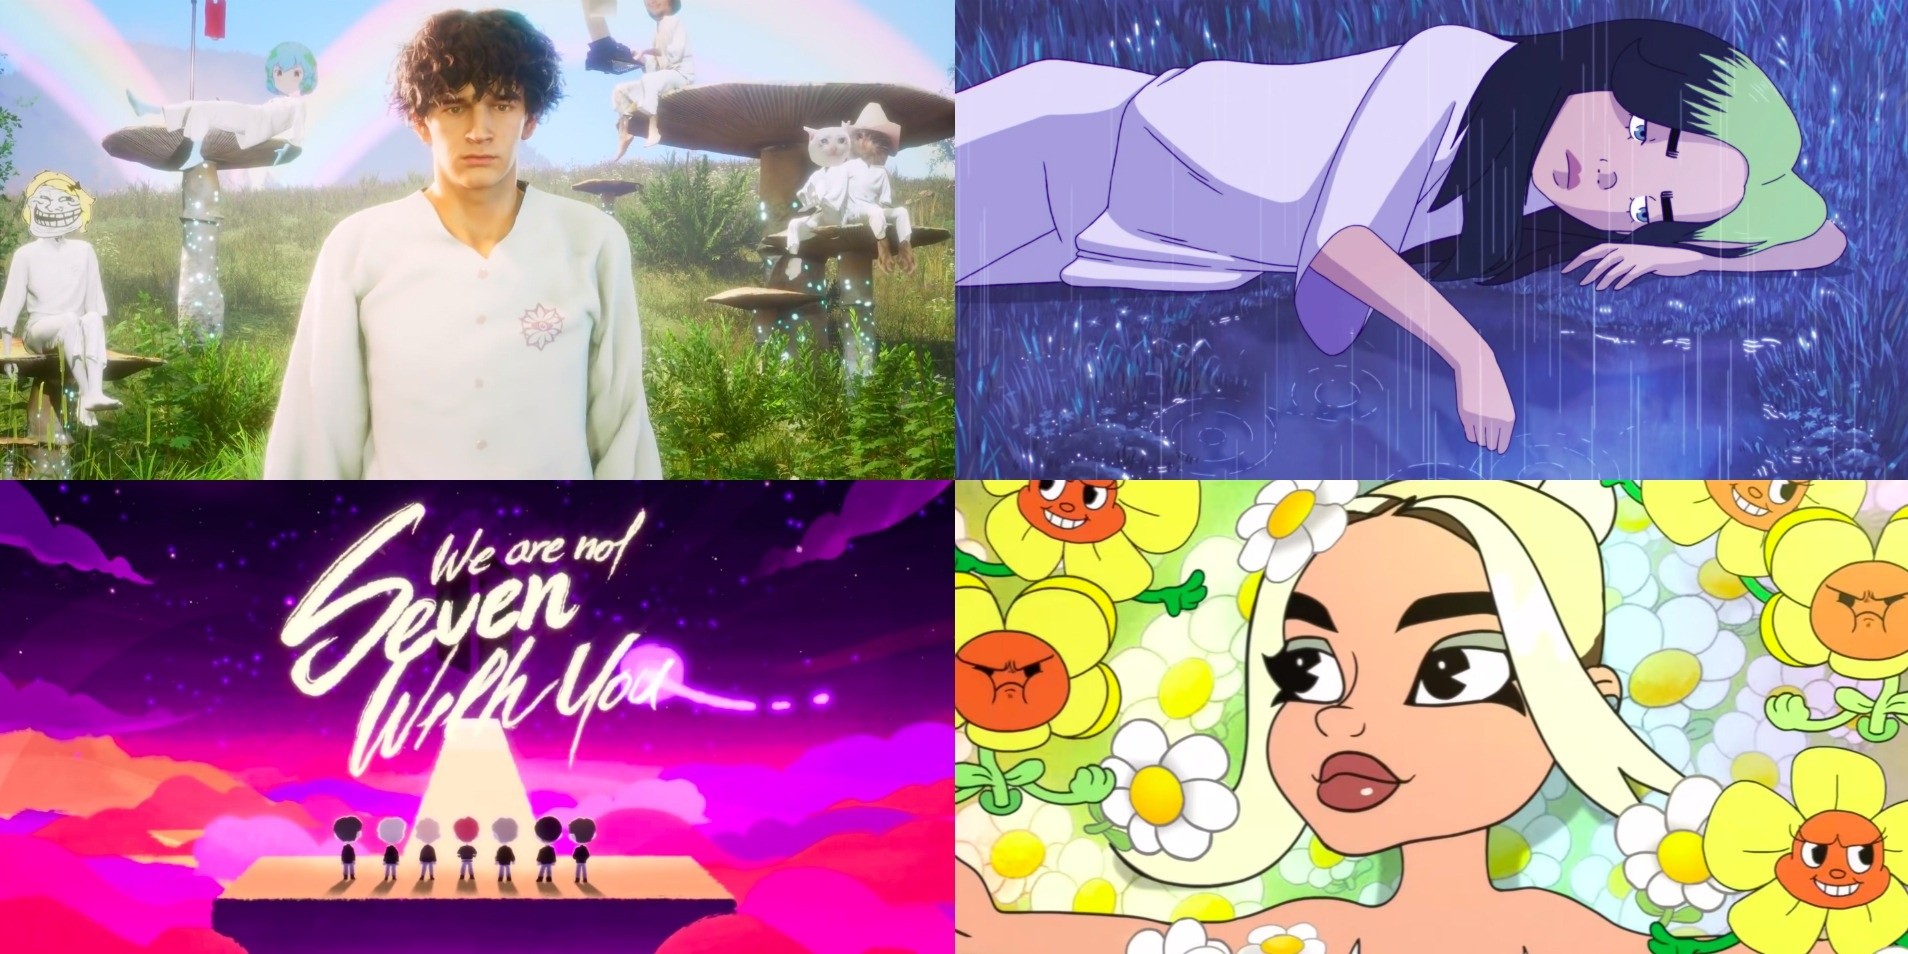 20 animated music videos from 2020 you should check out: BTS, Billie